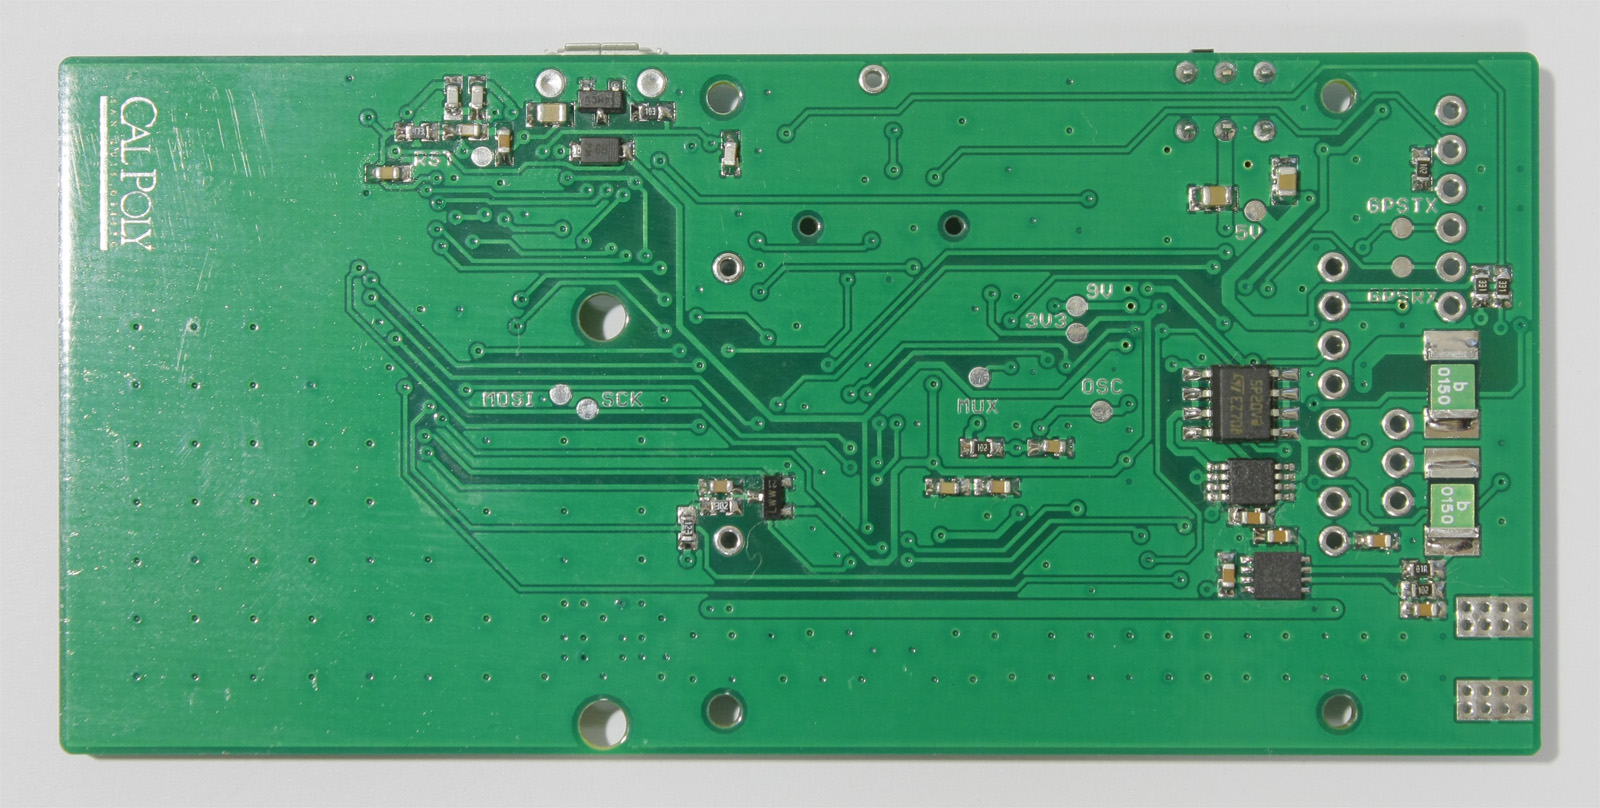 Bottom of PCB after soldering remaining SMT parts